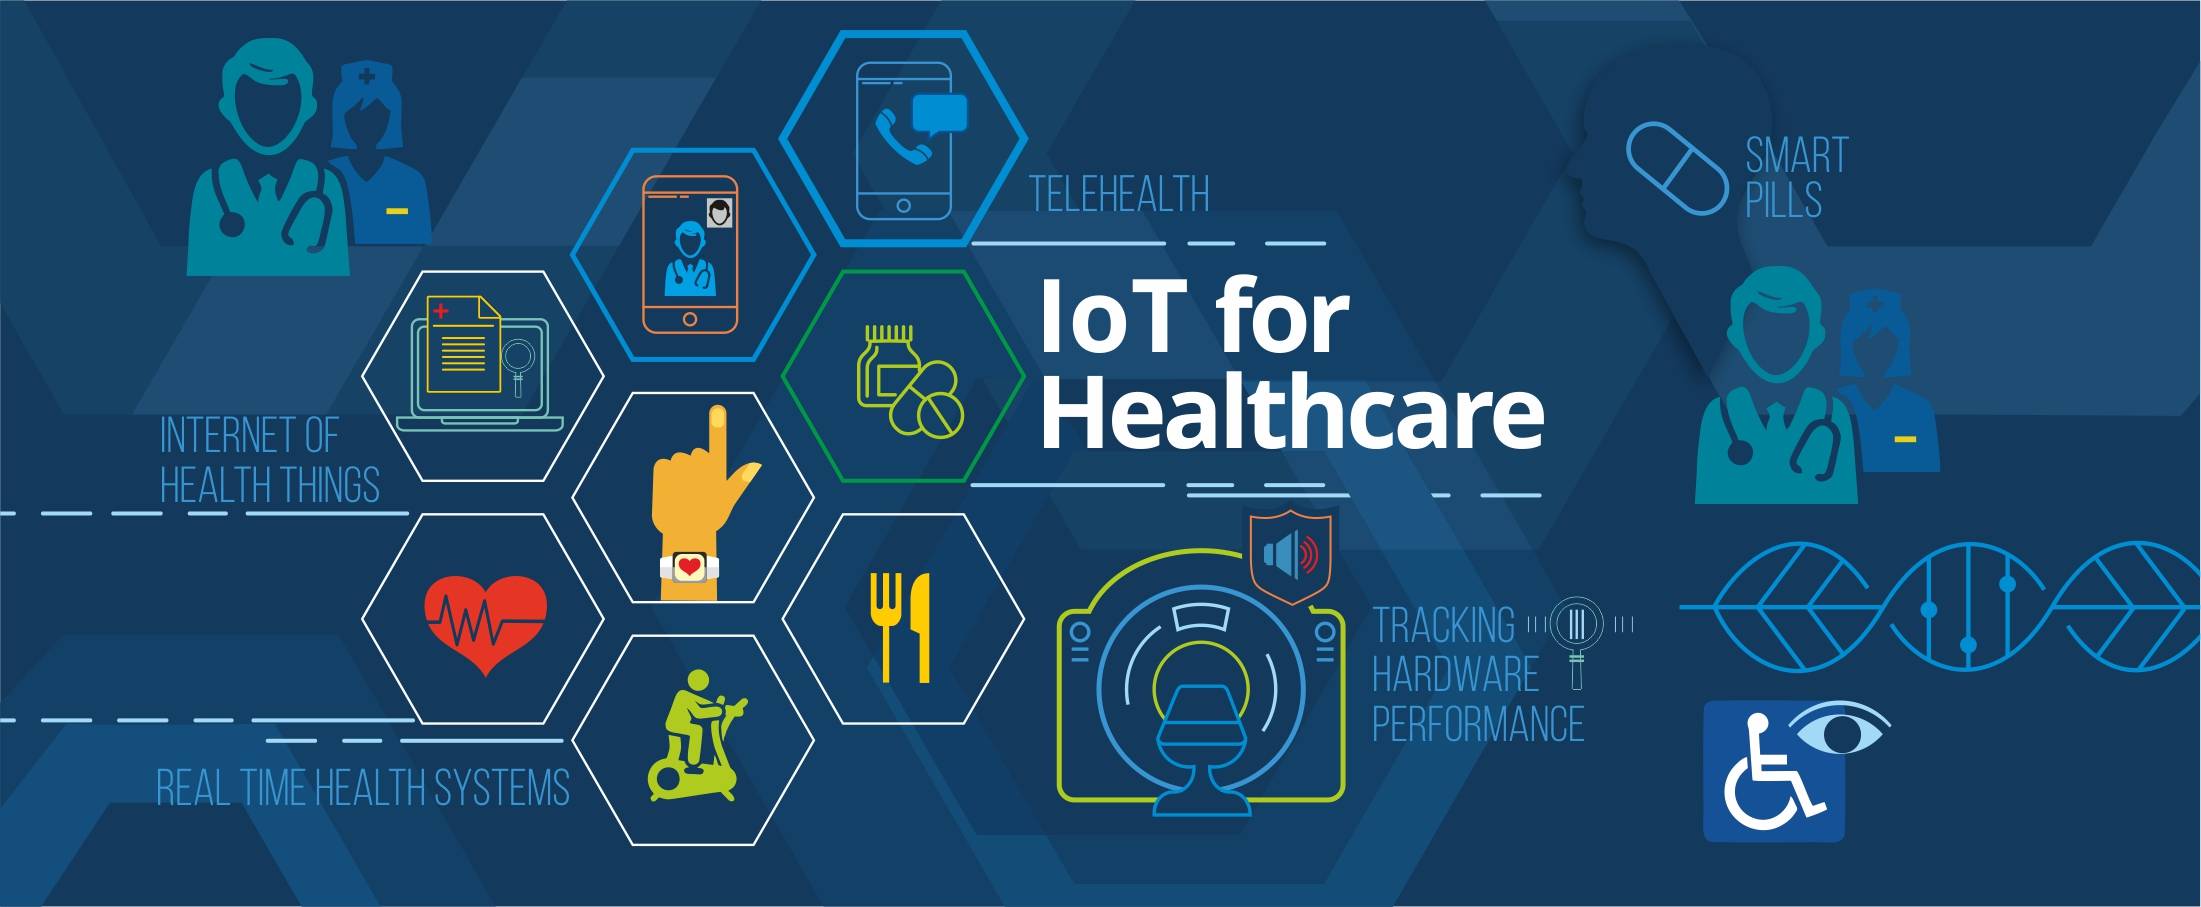 Internet-of-Things-IoT-in-Healthcare